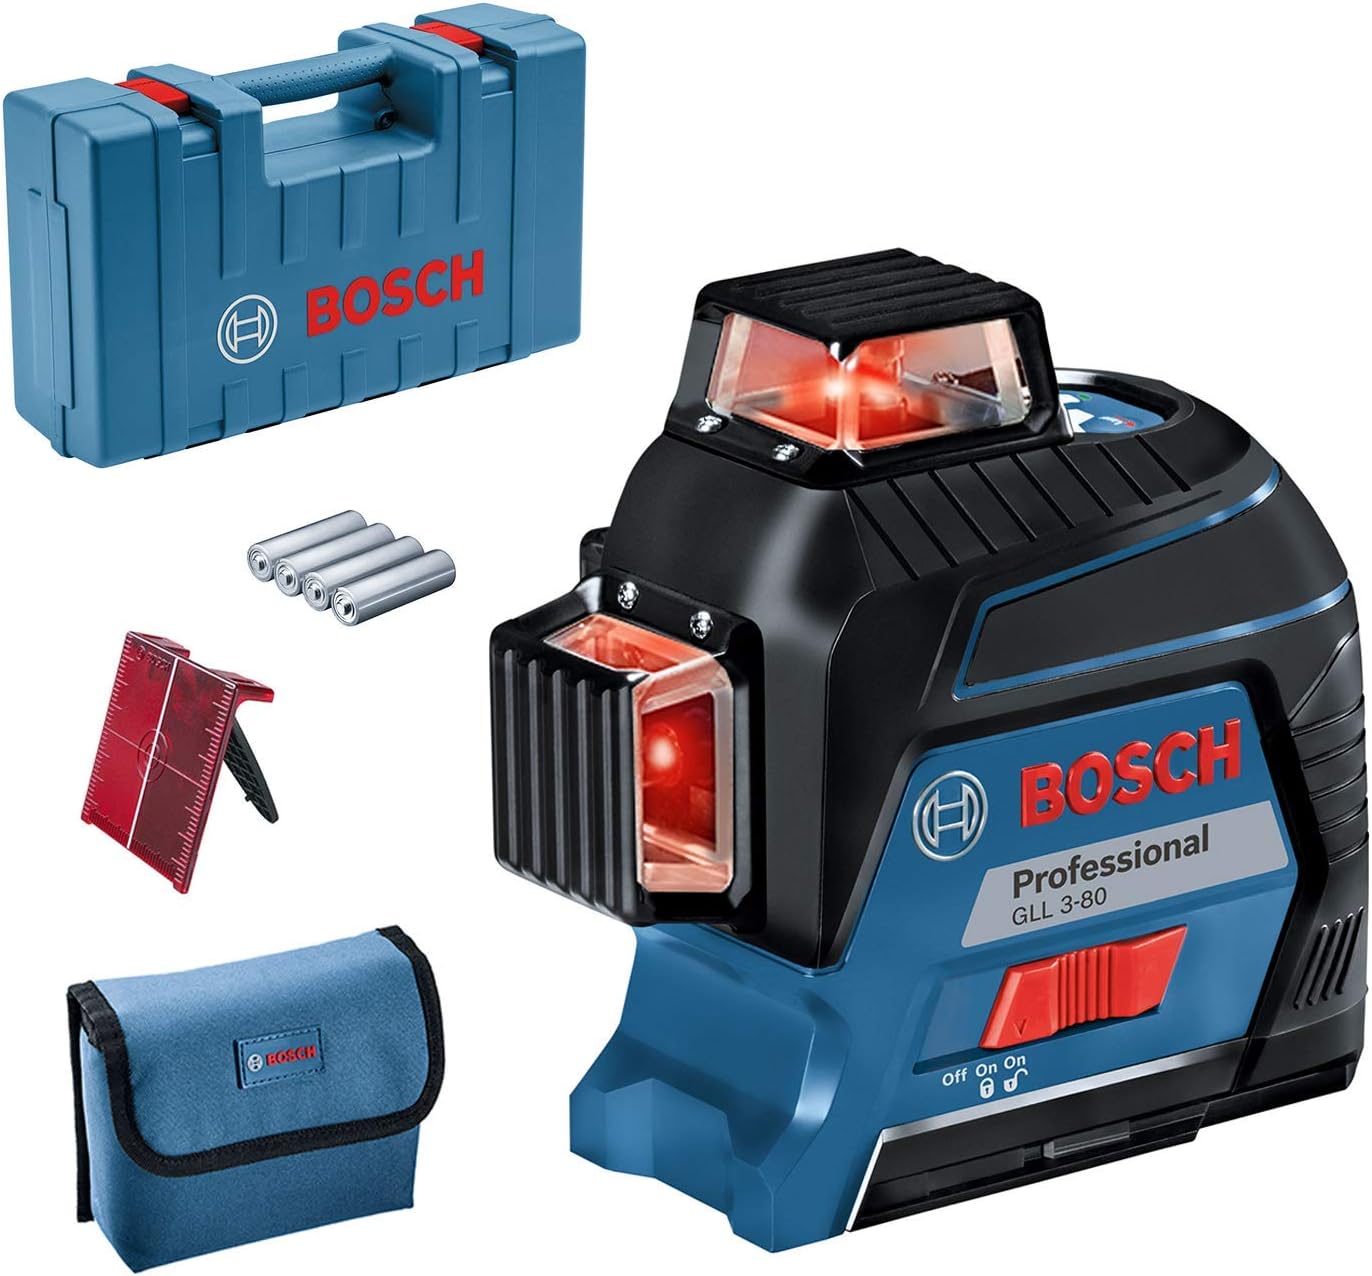 Bosch Professional Laser Level GLL 3-80 Review UK